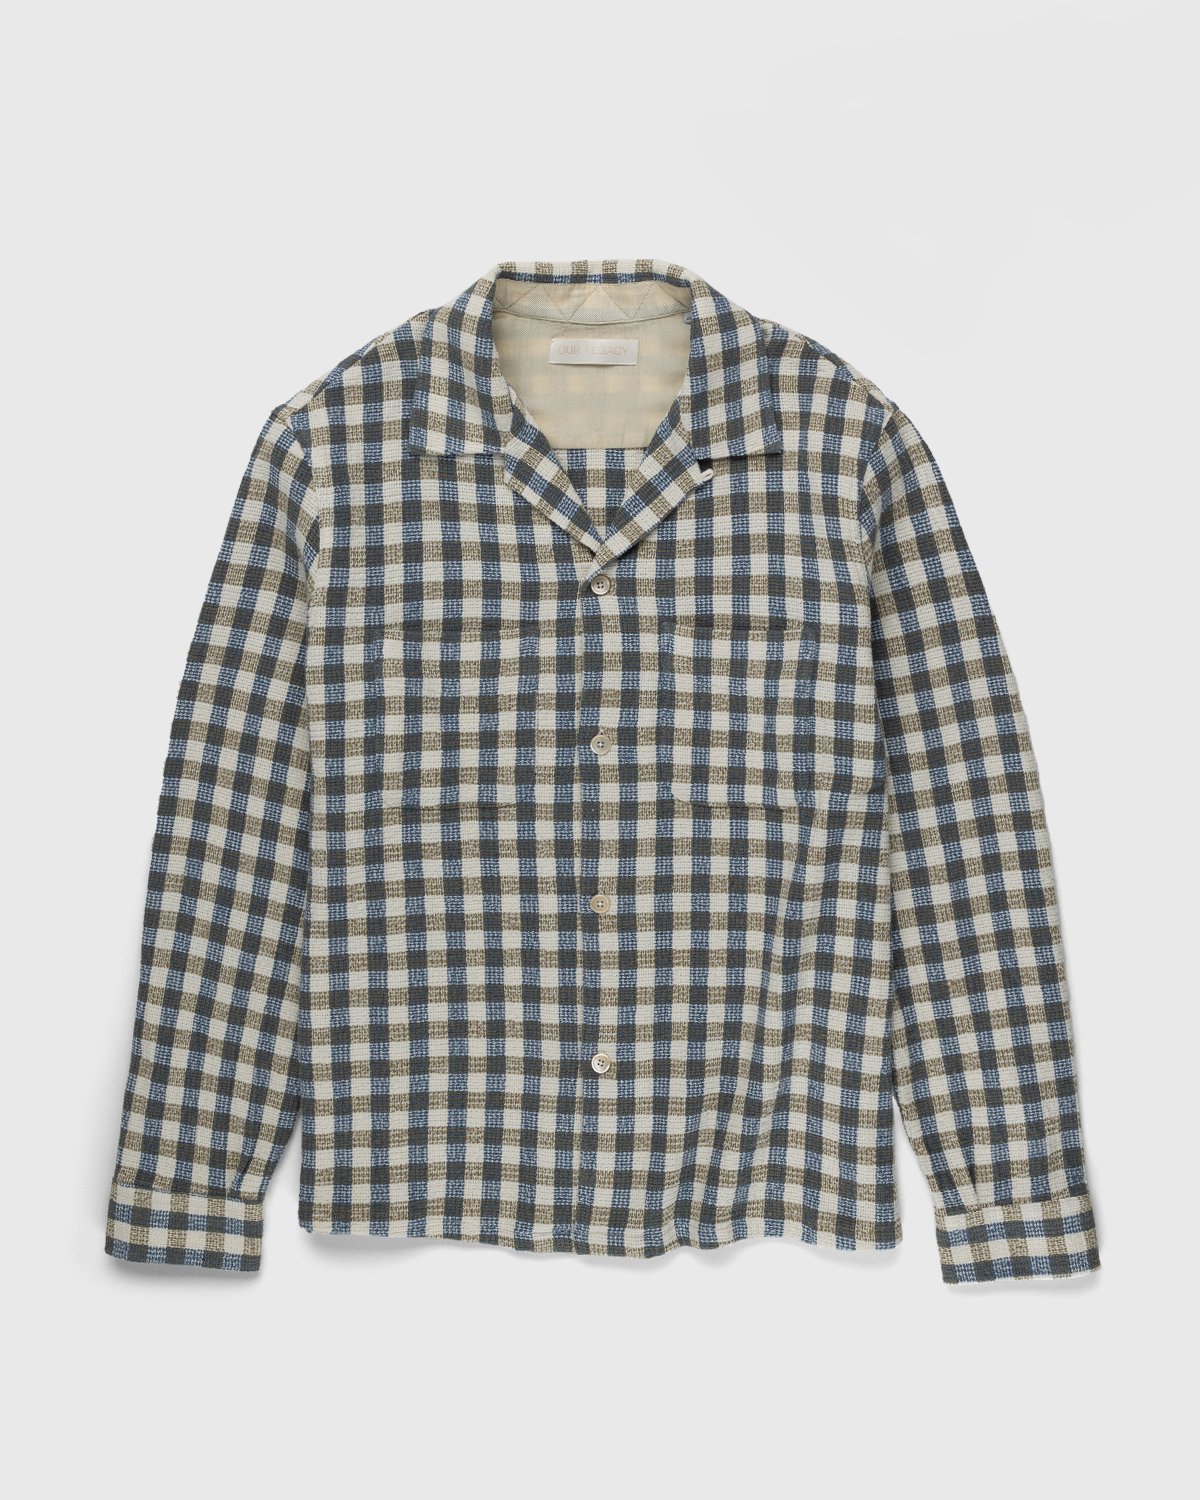 Our Legacy - Heusen Shirt Light Blue/Olive Summer Check - Clothing - Blue - Image 1